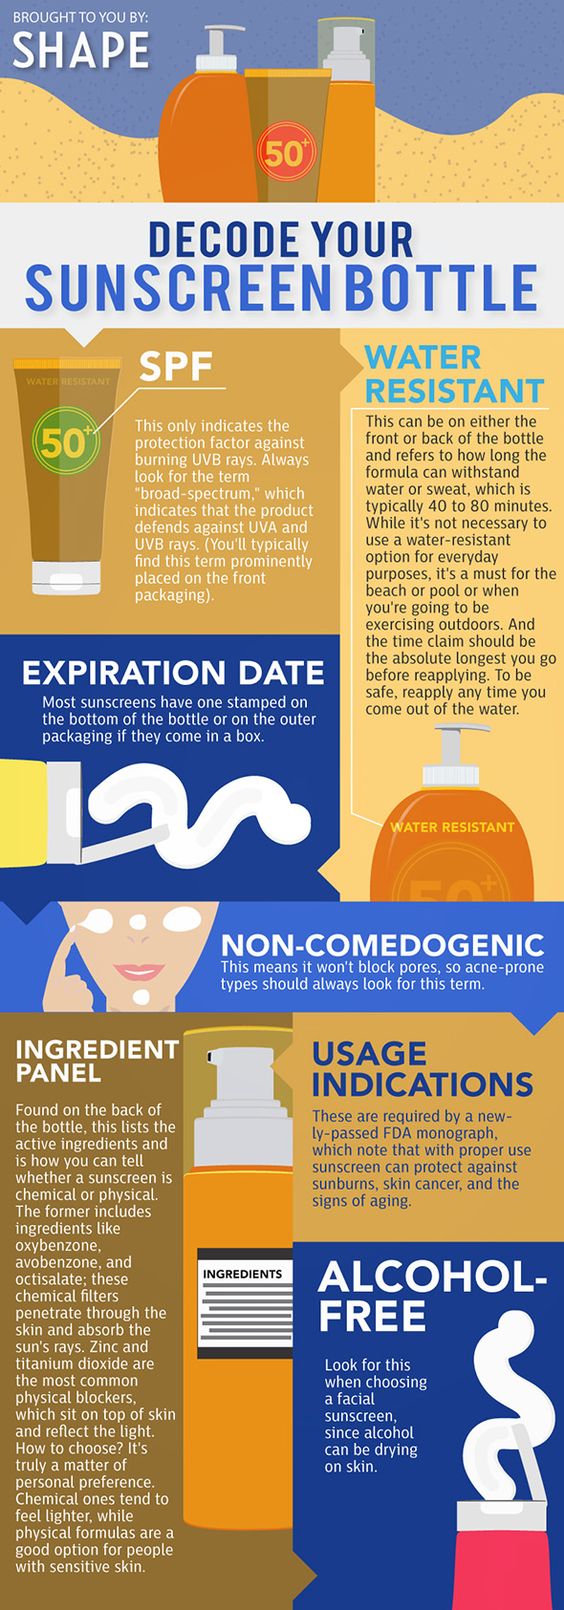 Decode Your Sunscreen Bottle via Shape || With all of the labeling on sunscreen packaging, it's important to know what you're getting and if it's suitable for your needs. It's also important to reapply often and to use the correct amounts. Thankfully, here's an infographic for that!